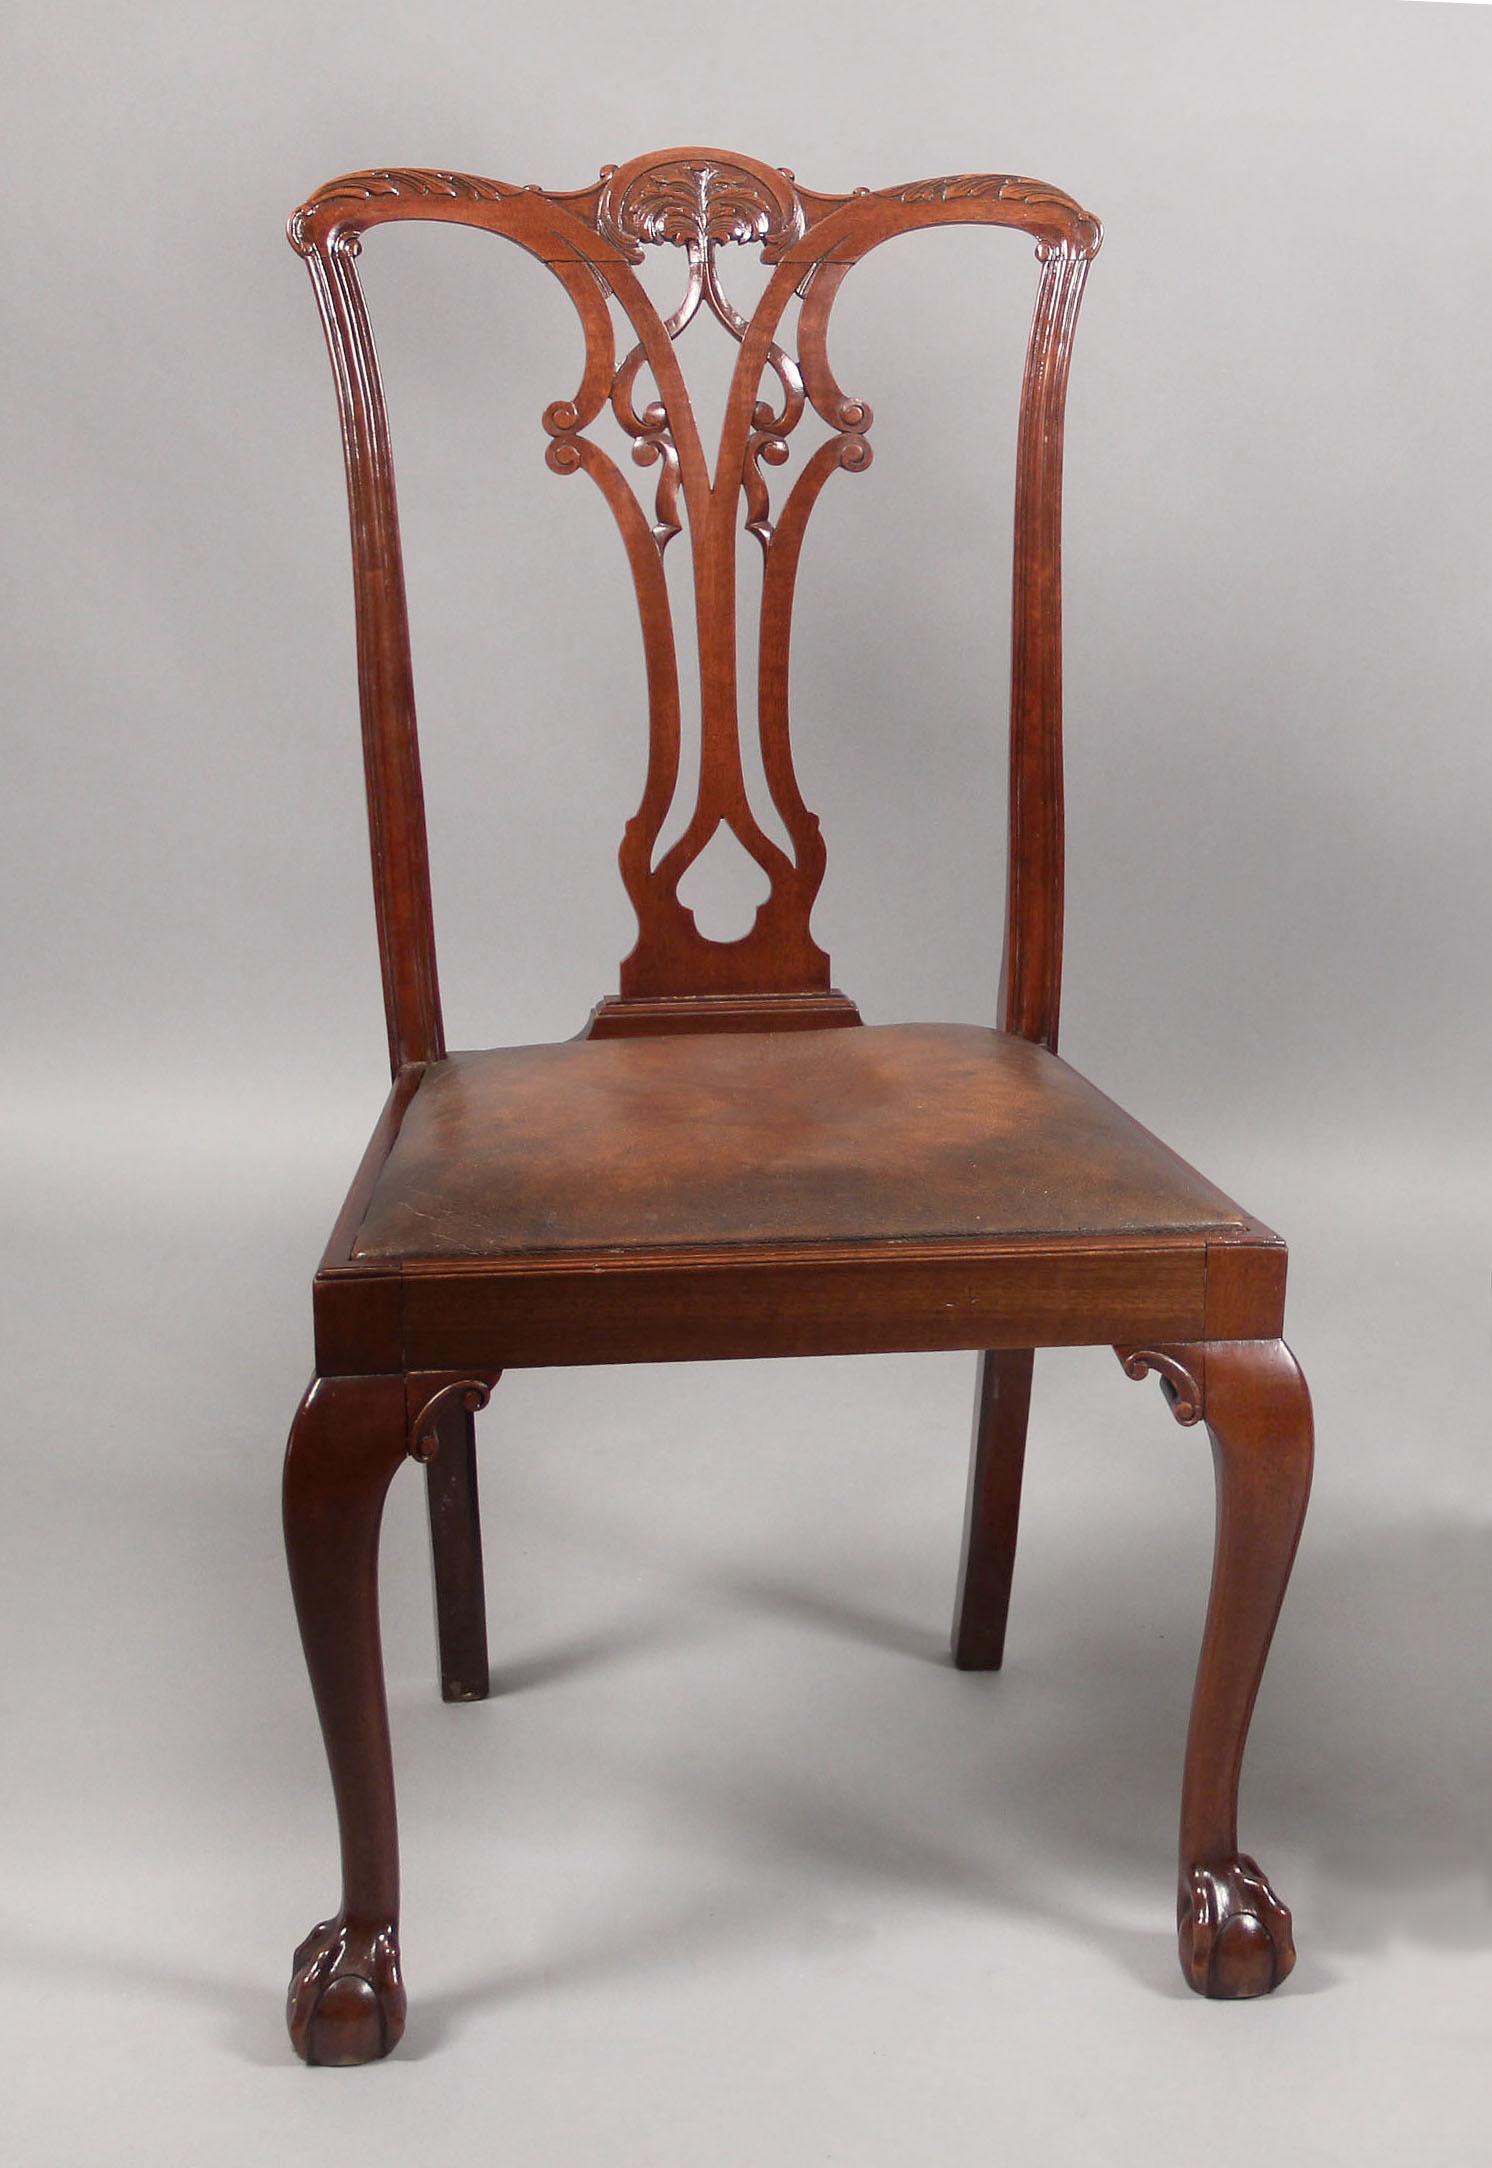 A set of 12 late 19th / early 20th century Chippendale style dining chairs.

Comprising of two-arm and ten side chairs.

Armchairs:
Height 39 inches / 99cm.
Width 24 inches / 61cm.
Depth 19 inches / 48cm.

Side chairs:
Height 38 inches /